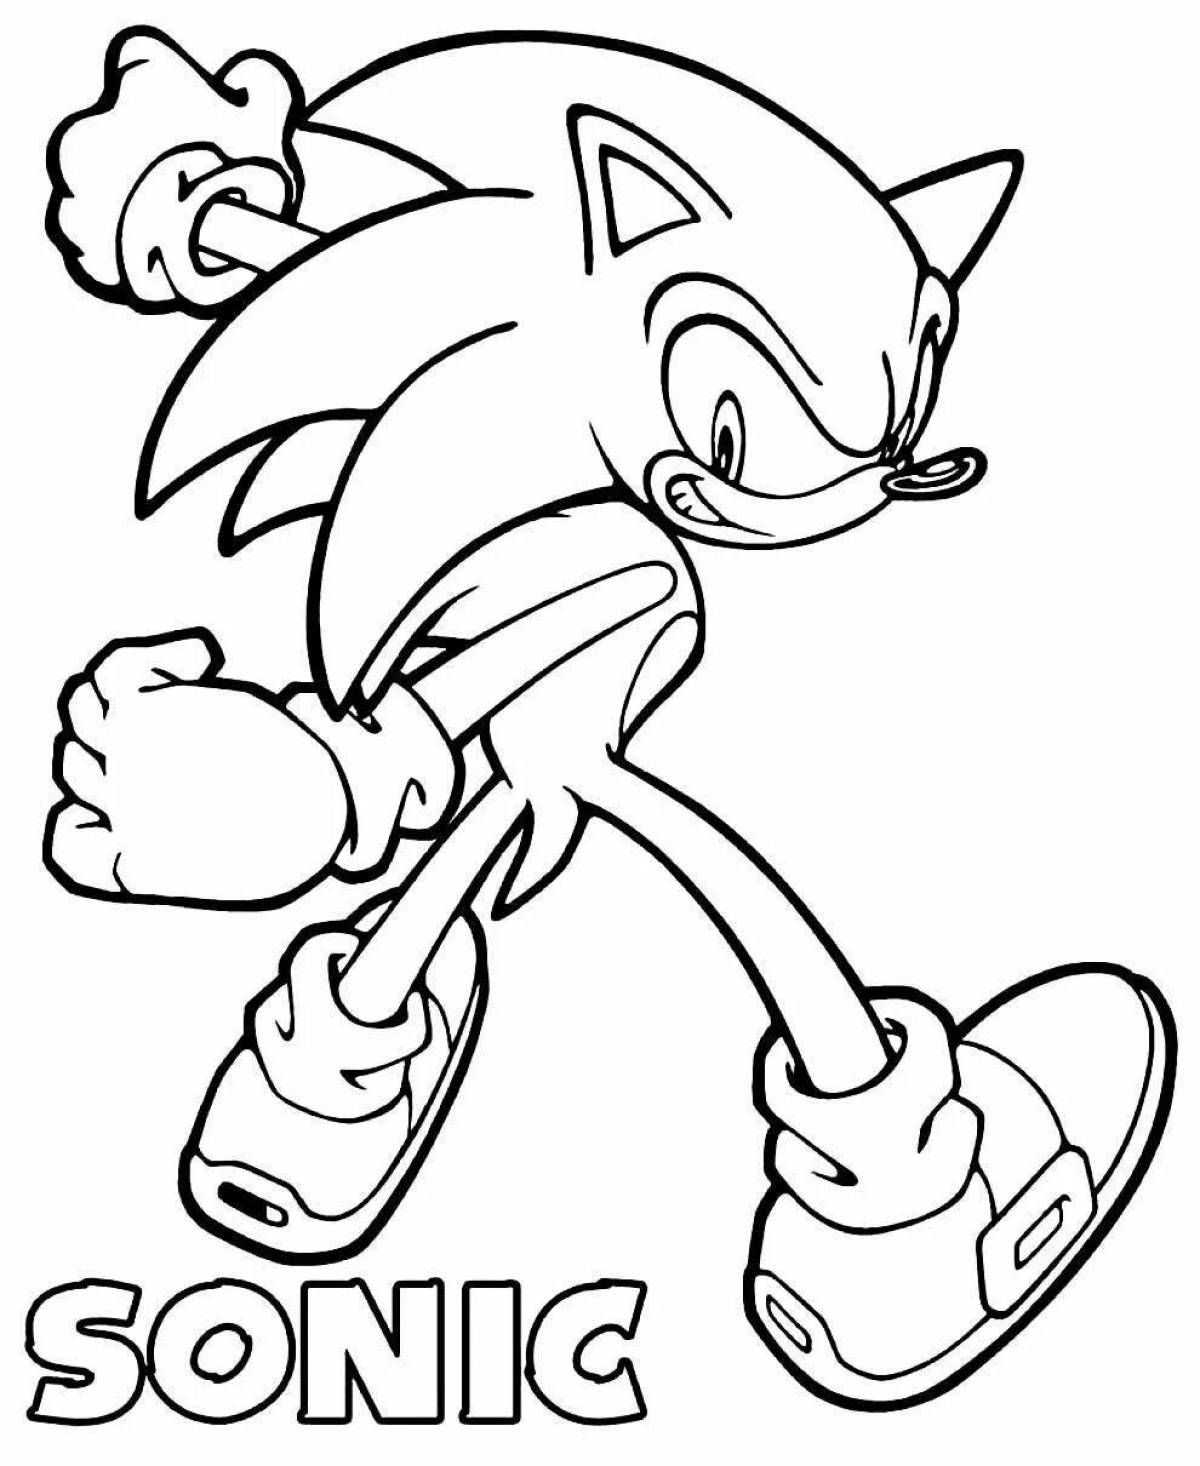 Charming sonic theos coloring book